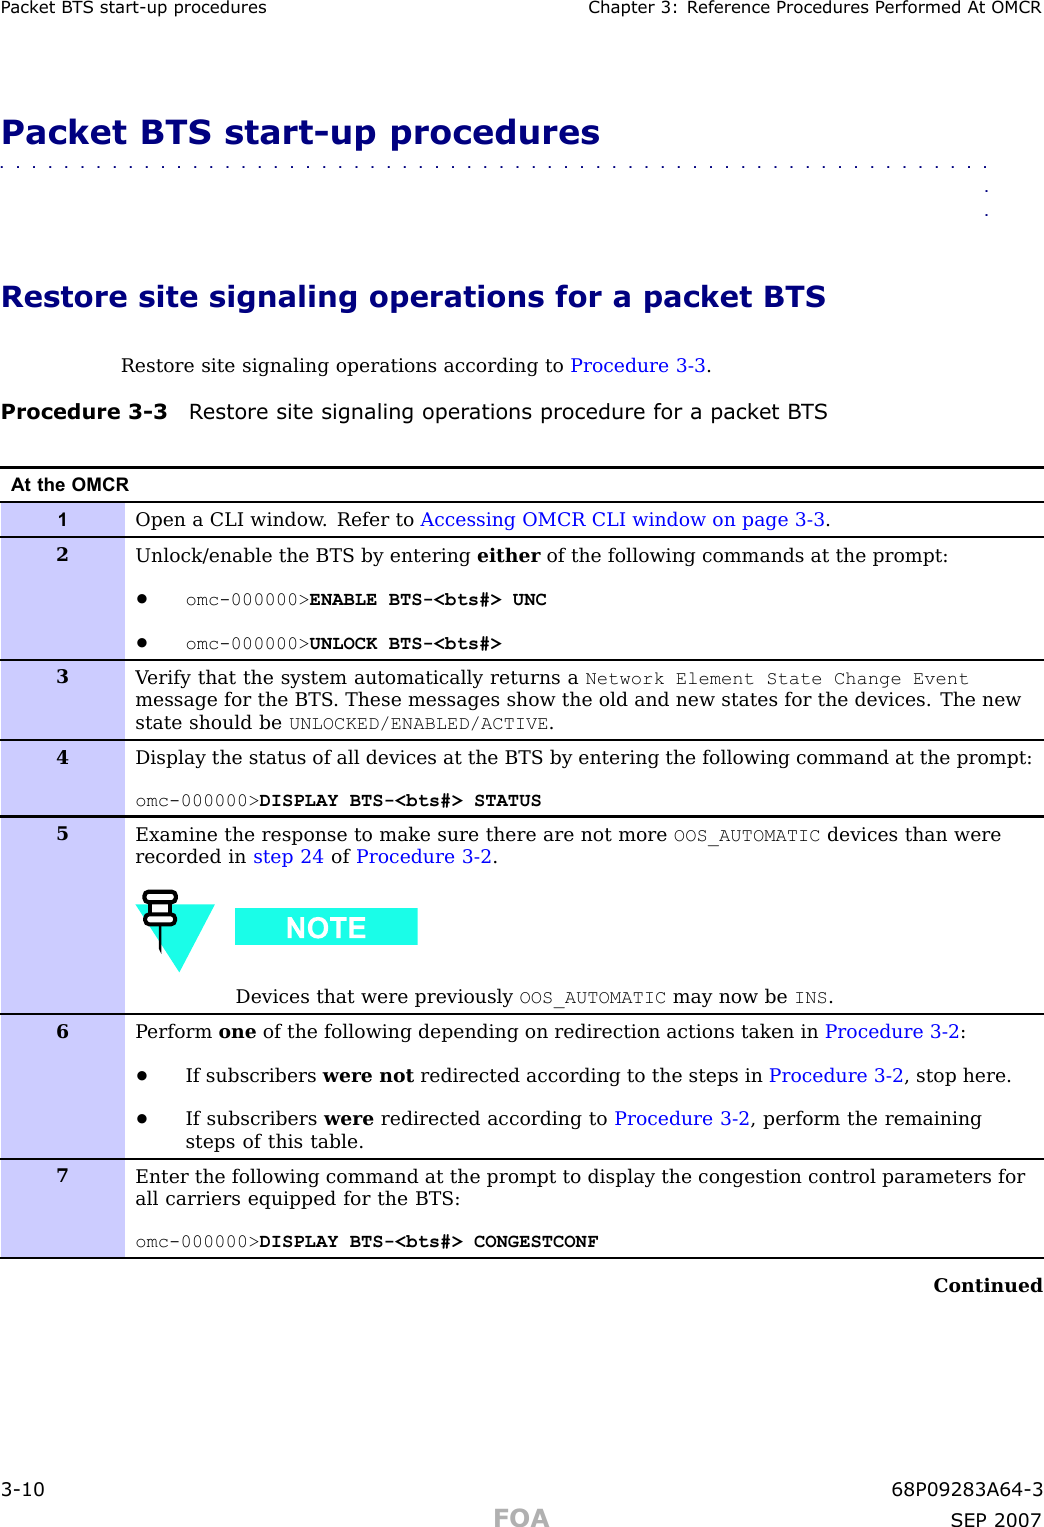 P ack et B T S start -up procedures Chapter 3: R eference Procedures P erformed A t OMCRPacket BTS start -up procedures■■■■■■■■■■■■■■■■■■■■■■■■■■■■■■■■■■■■■■■■■■■■■■■■■■■■■■■■■■■■■■■■Restore site signaling operations for a packet BTSRestore site signaling operations according to Procedure 3 -3 .Procedure 3 -3 R estore site signaling oper ations procedure for a pack et B T SAt the OMCR1Open a CLI window . Refer to Accessing OMCR CLI window on page 3- 3 .2Unlock/enable the BTS by entering either of the following commands at the prompt:•omc-000000&gt; ENABLE BTS-&lt;bts#&gt; UNC•omc-000000&gt; UNLOCK BTS-&lt;bts#&gt;3V erify that the system automatically returns a Network Element State Change Eventmessage for the BTS . These messages show the old and new states for the devices. The newstate should be UNLOCKED/ENABLED/ACTIVE .4Display the status of all devices at the BTS by entering the following command at the prompt:omc-000000&gt; DISPLAY BTS-&lt;bts#&gt; STATUS5Examine the response to make sure there are not more OOS_AUTOMATIC devices than wererecorded in step 24 of Procedure 3-2 .Devices that were previously OOS_AUTOMATIC may now be INS .6P erform one of the following depending on redirection actions taken in Procedure 3-2 :•If subscribers were not redirected according to the steps in Procedure 3-2 , stop here.•If subscribers were redirected according to Procedure 3-2 , perform the remainingsteps of this table.7Enter the following command at the prompt to display the congestion control parameters forall carriers equipped for the BTS:omc-000000&gt; DISPLAY BTS-&lt;bts#&gt; CONGESTCONFContinued3 -10 68P09283A64 -3FOA SEP 2007